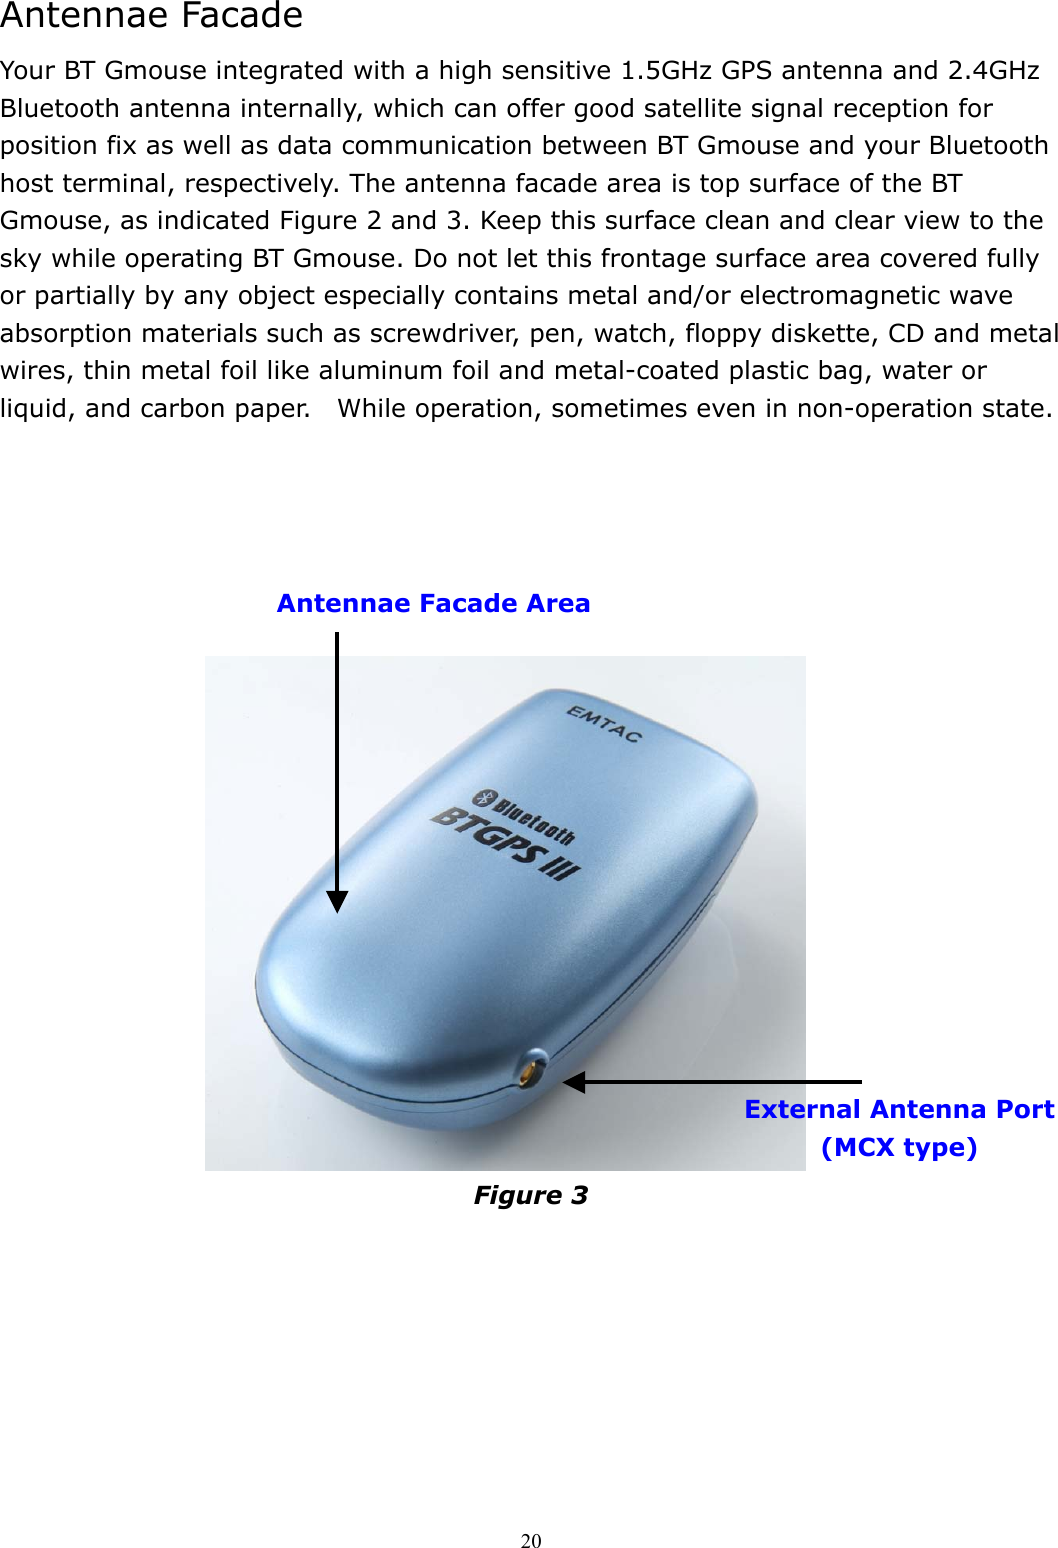  20Antennae Facade Your BT Gmouse integrated with a high sensitive 1.5GHz GPS antenna and 2.4GHz Bluetooth antenna internally, which can offer good satellite signal reception for position fix as well as data communication between BT Gmouse and your Bluetooth host terminal, respectively. The antenna facade area is top surface of the BT Gmouse, as indicated Figure 2 and 3. Keep this surface clean and clear view to the sky while operating BT Gmouse. Do not let this frontage surface area covered fully or partially by any object especially contains metal and/or electromagnetic wave absorption materials such as screwdriver, pen, watch, floppy diskette, CD and metal wires, thin metal foil like aluminum foil and metal-coated plastic bag, water or liquid, and carbon paper.    While operation, sometimes even in non-operation state.                                   Figure 3    Antennae Facade Area External Antenna Port (MCX type) 